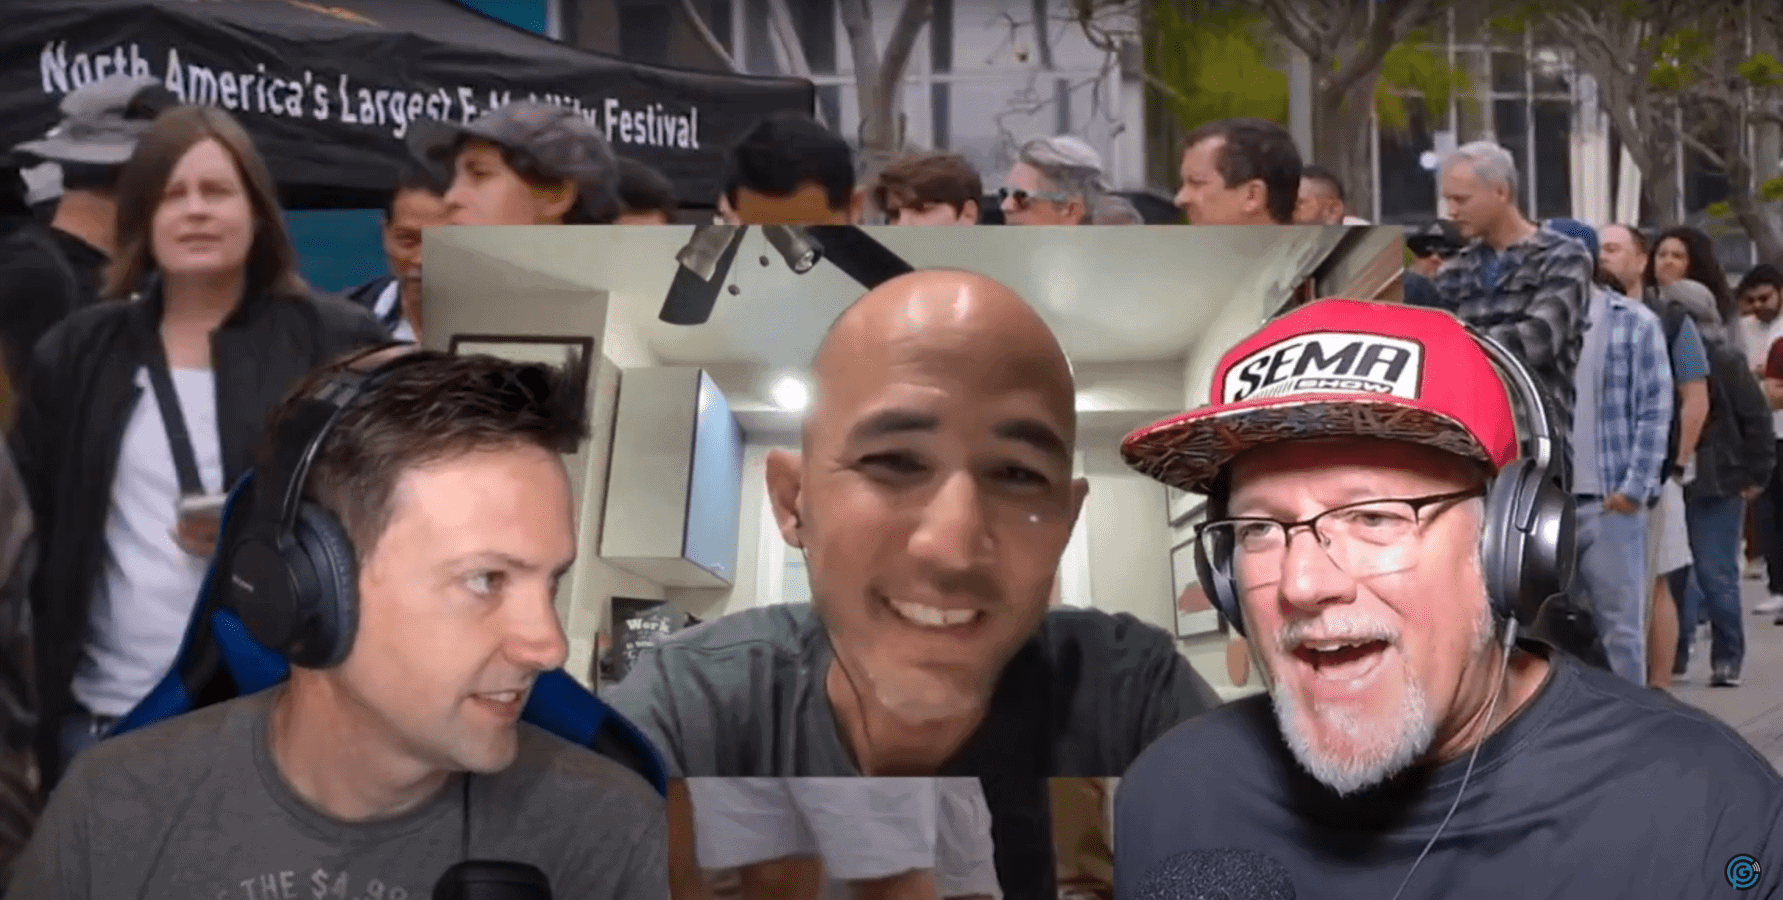 In Episode 147 of "Down With Electrify Expo" of Parts Counter Gurus, Keith and Jay interview Neil Tjin, the Director of Electrify Showoff at Electrify Expo. They discuss the successful first Electrify Expo show of the 2023 season in Long Beach, California, and share what attendees can expect at upcoming shows. Neil provides insights into everything Electrify Expo, highlighting the electrification of the automotive industry. The hosts caught up with Neil as he prepares for the next show in San Francisco on June 24-25, 2023.